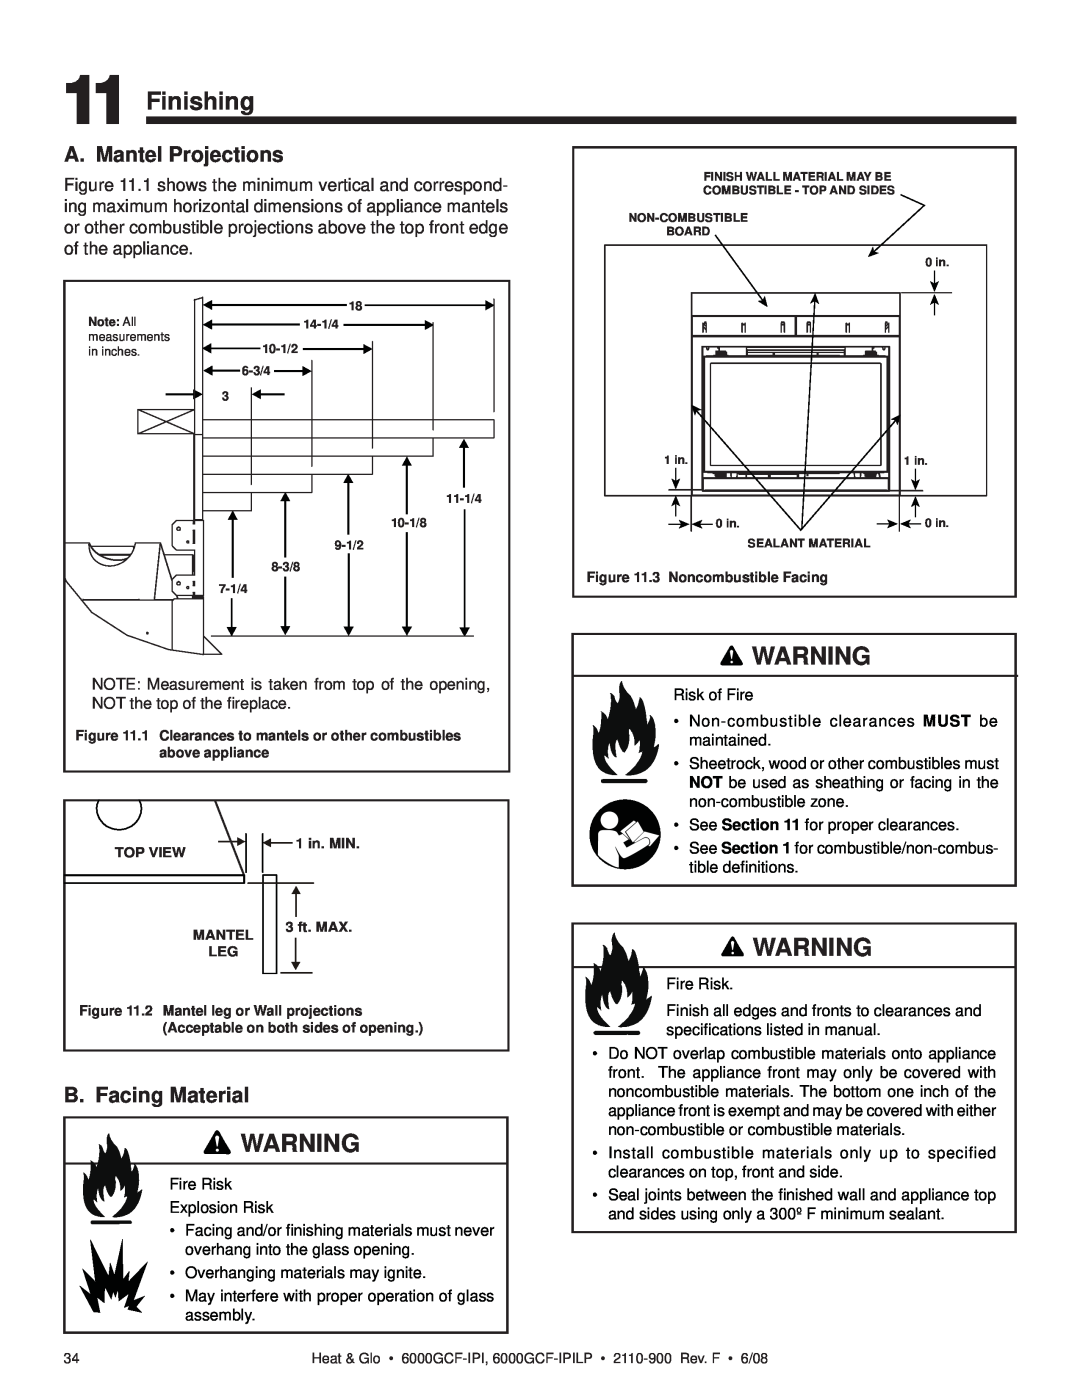 Heat & Glo LifeStyle 6000GCF-IPILP owner manual Finishing, A. Mantel Projections, B. Facing Material 